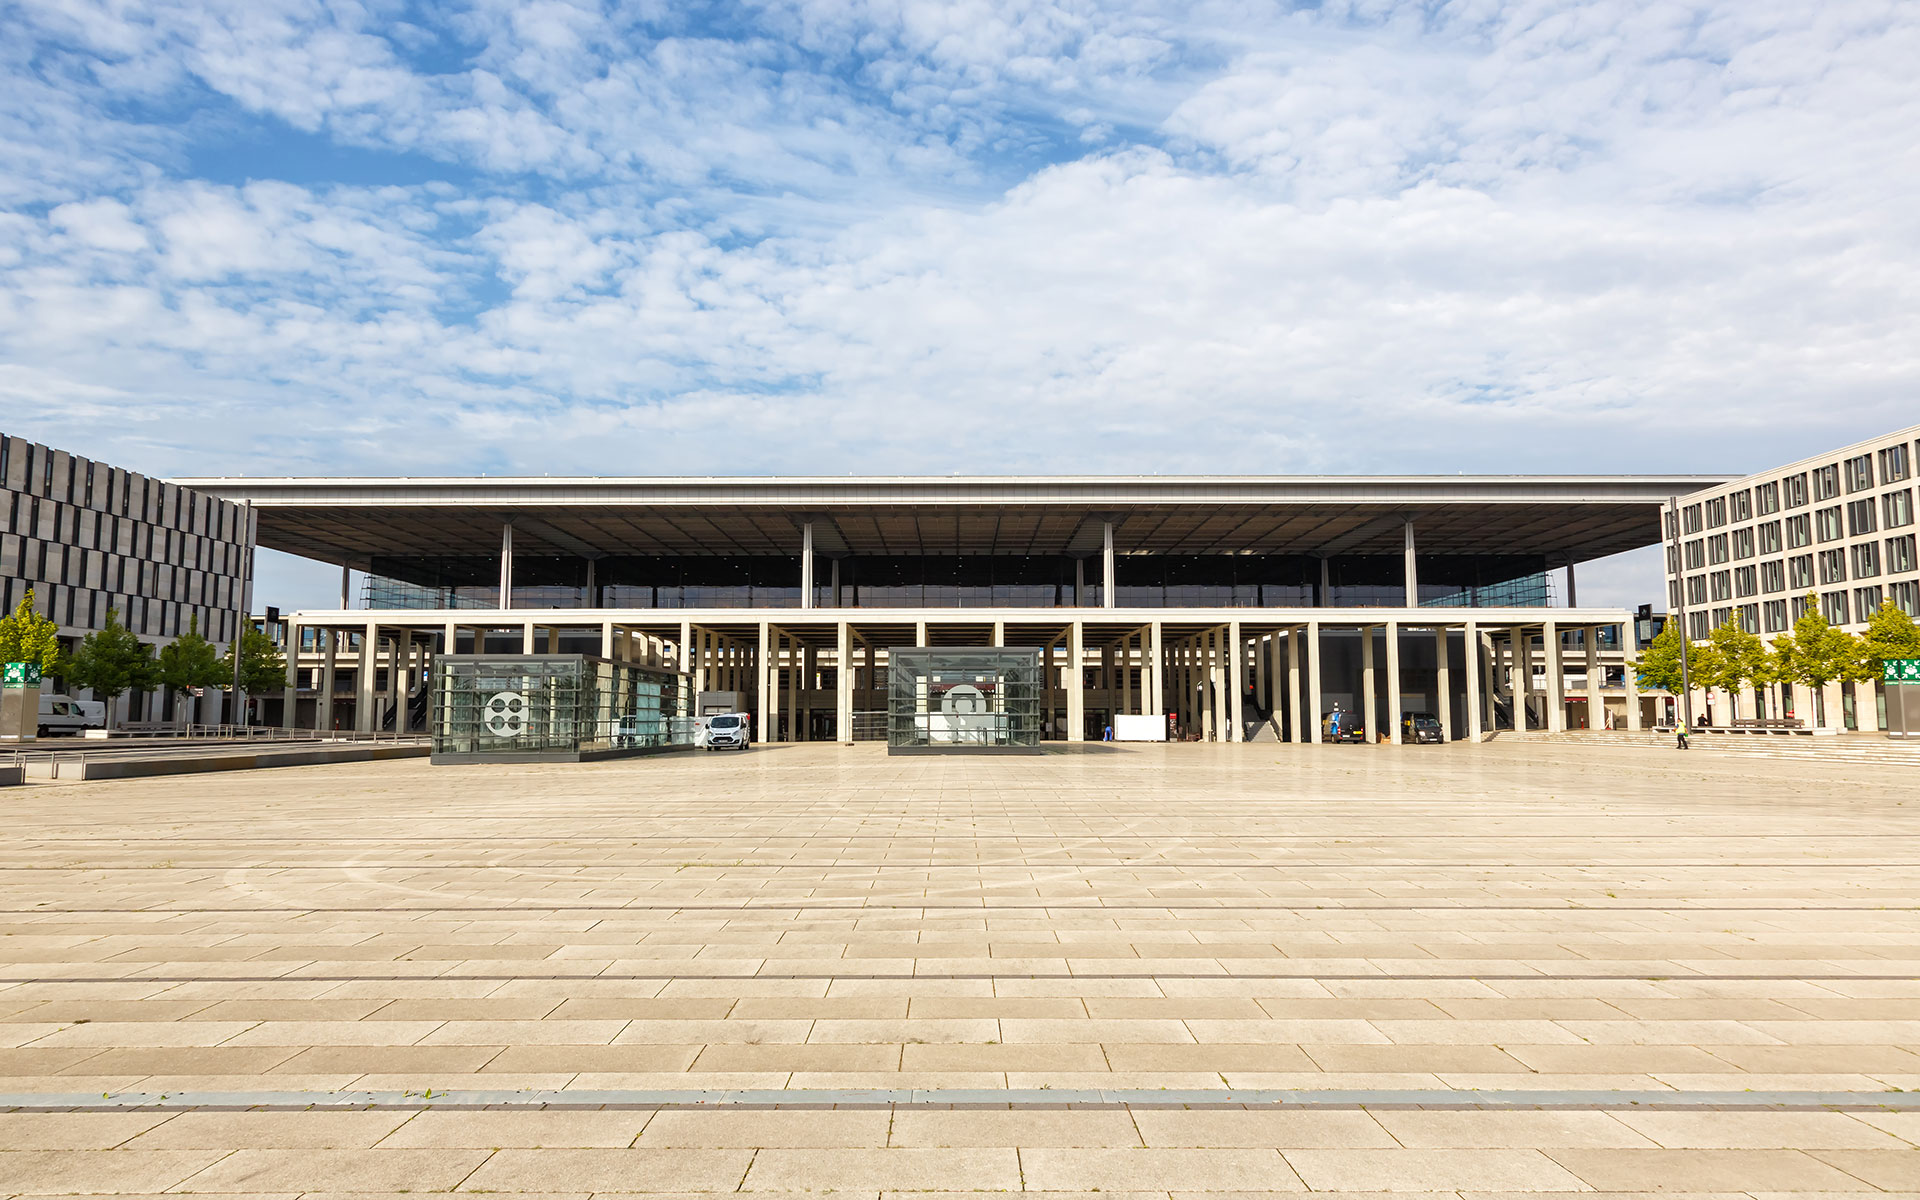 Terminal 1-2 of the new Berlin Airport BER (photo © Boarding1now / dreamstime.com).